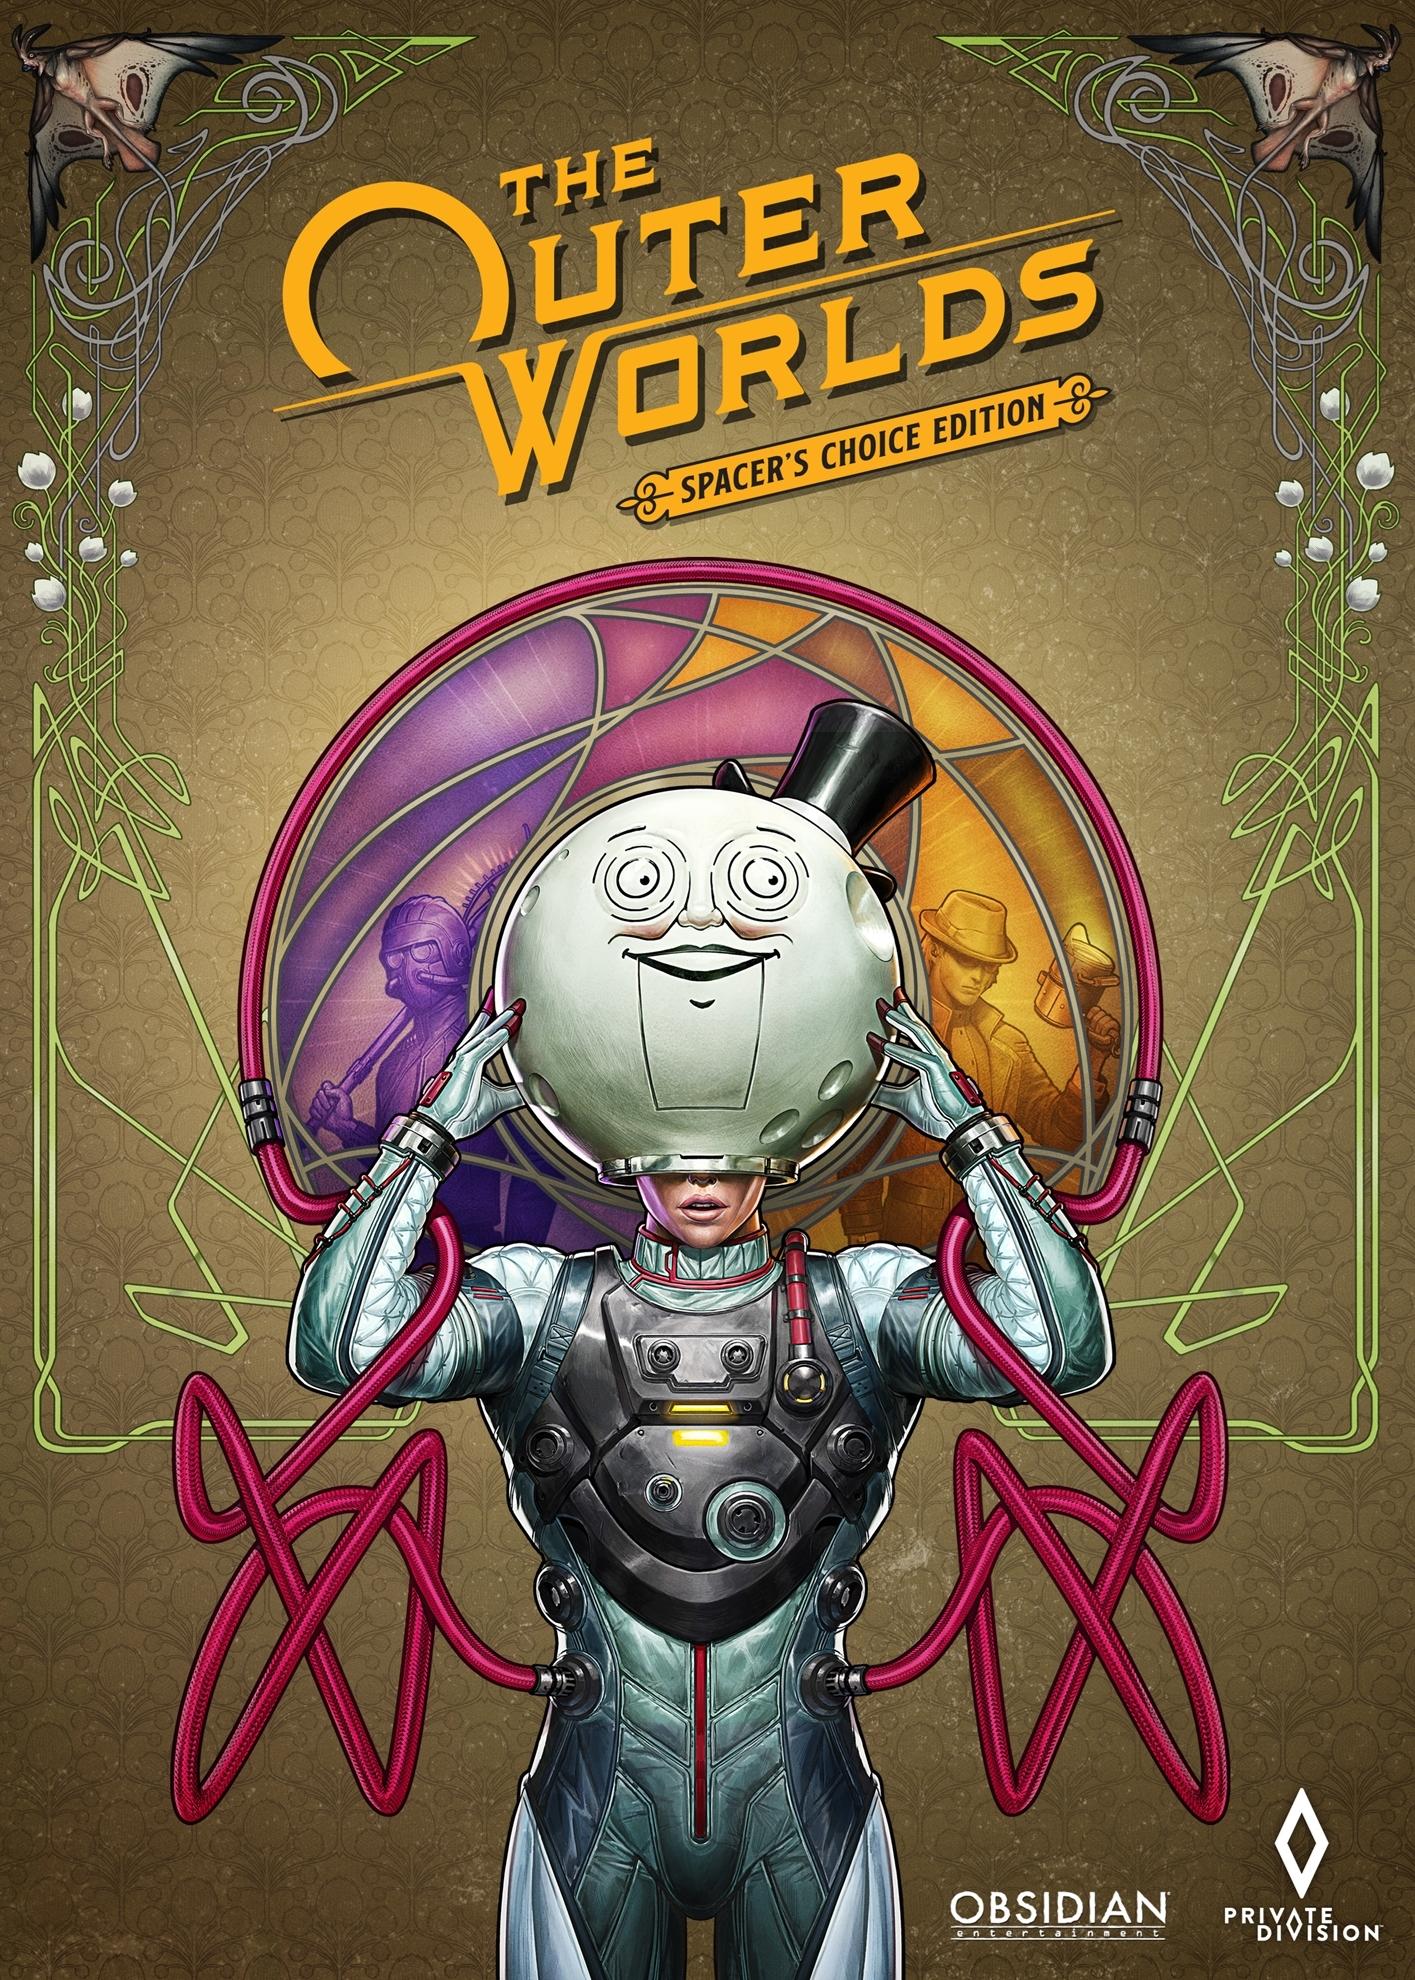 The Outer Worlds: Spacer’s Choice Edition (Steam) | ROW (0412ea7a-5535-4fee-b985-4a51f1fc8b63)